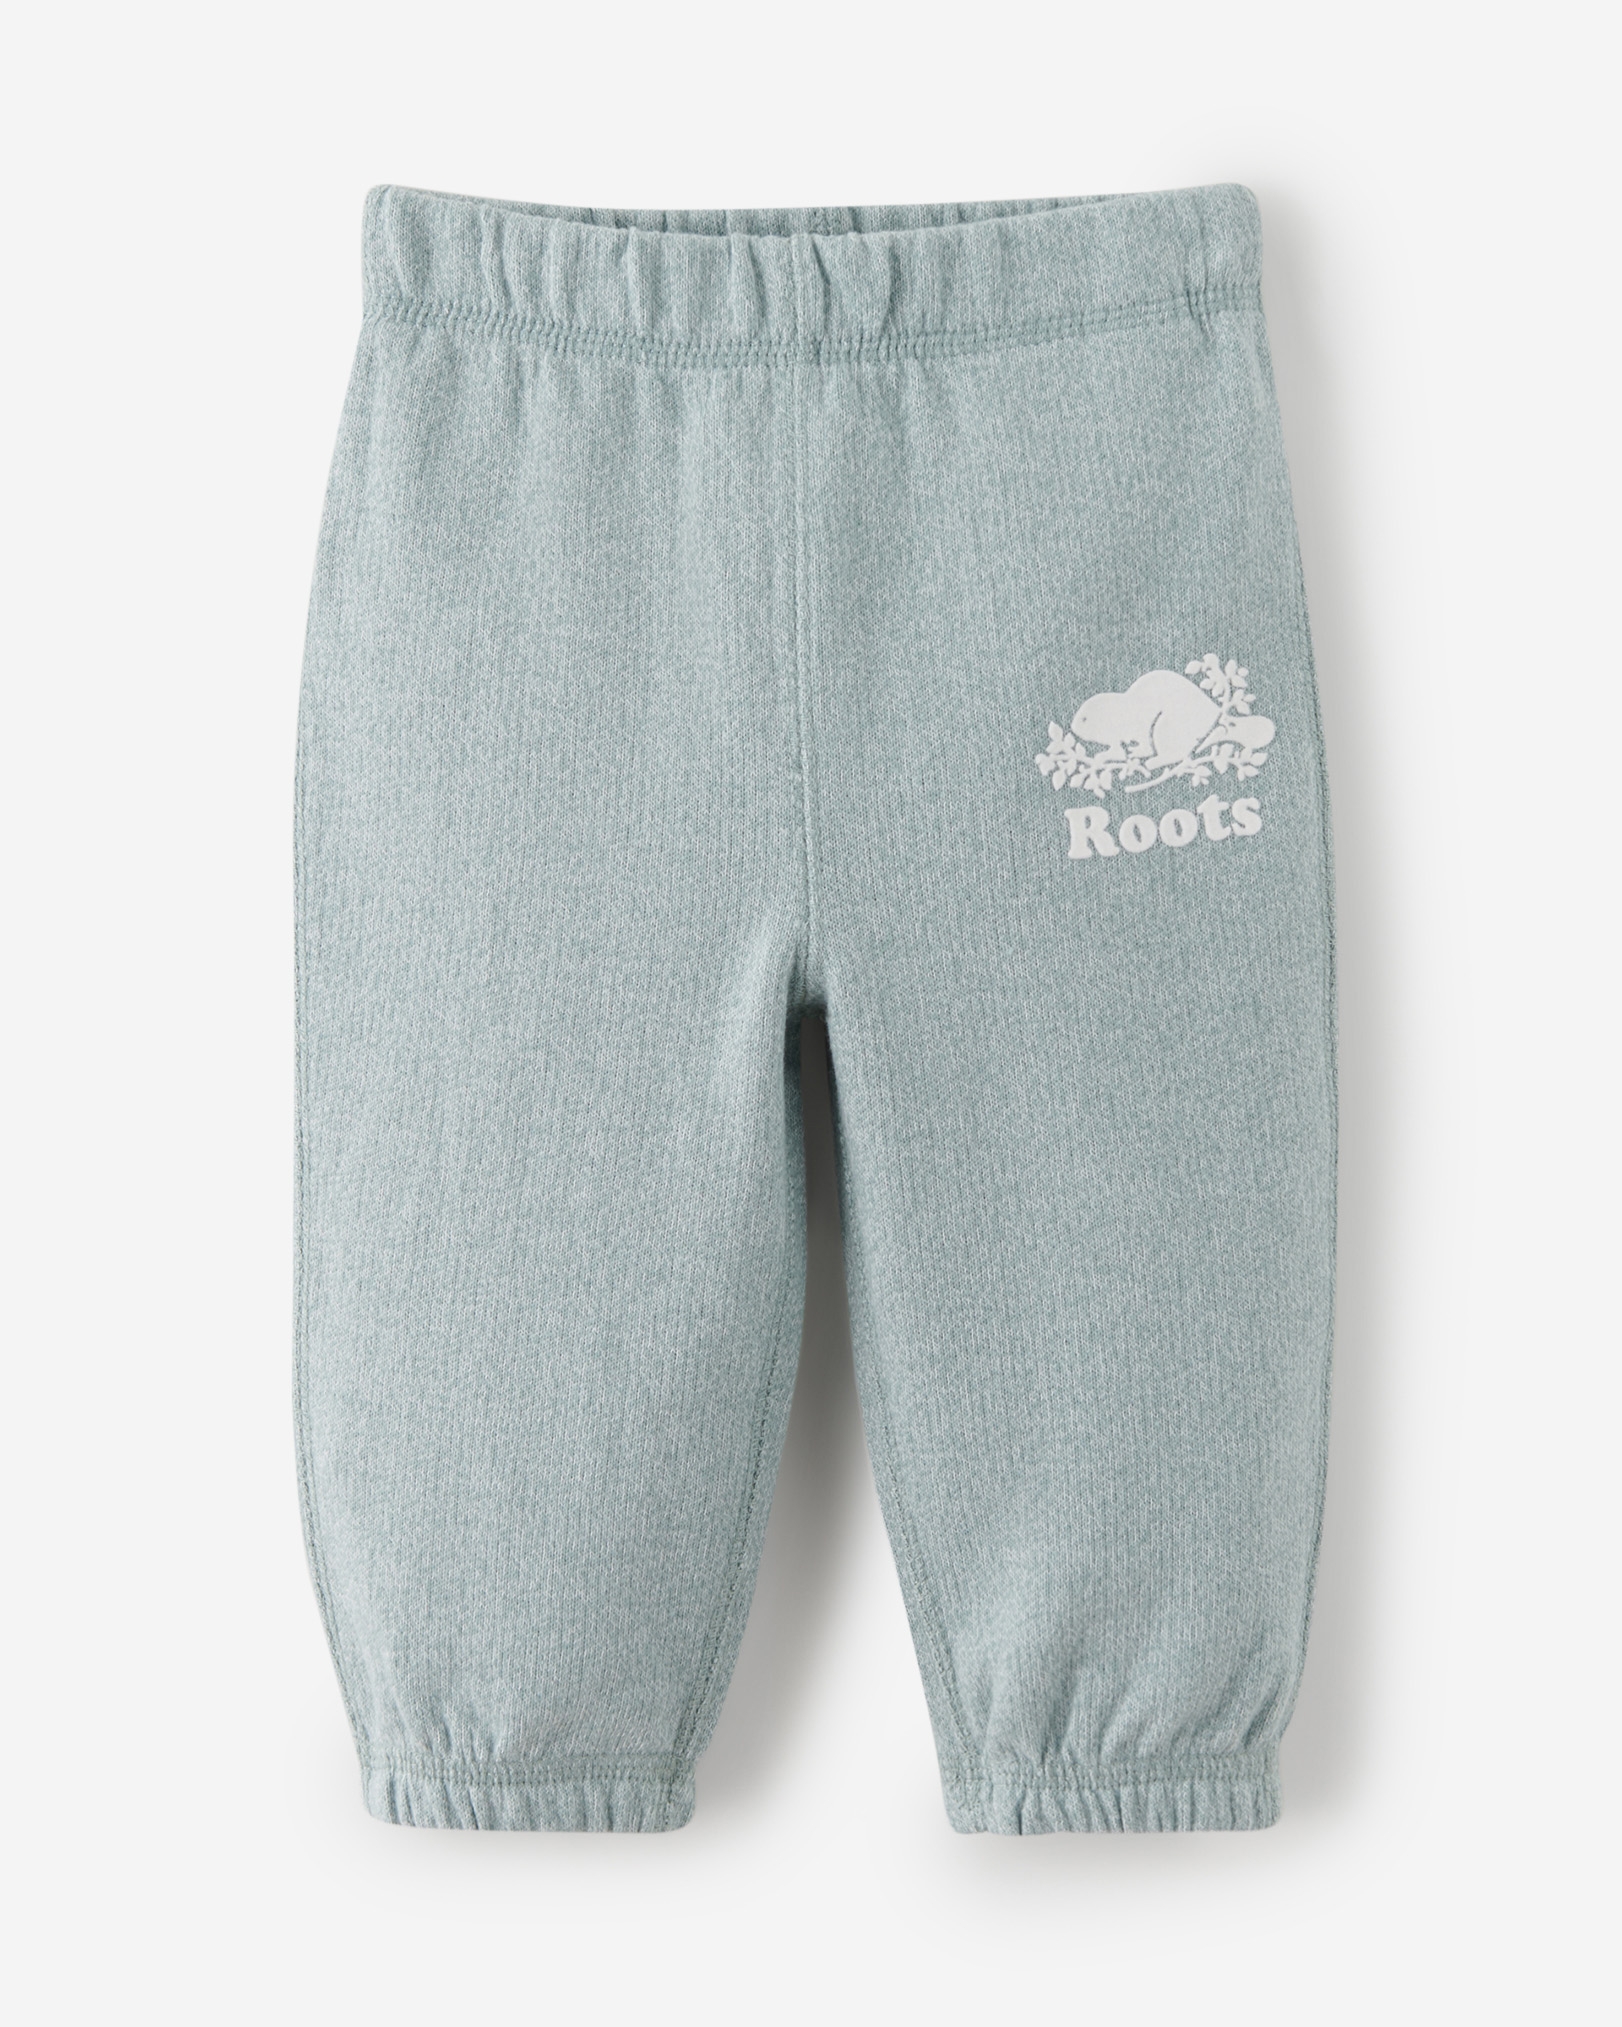 Roots Baby Original Sweatpant in Silver Blue Pepper